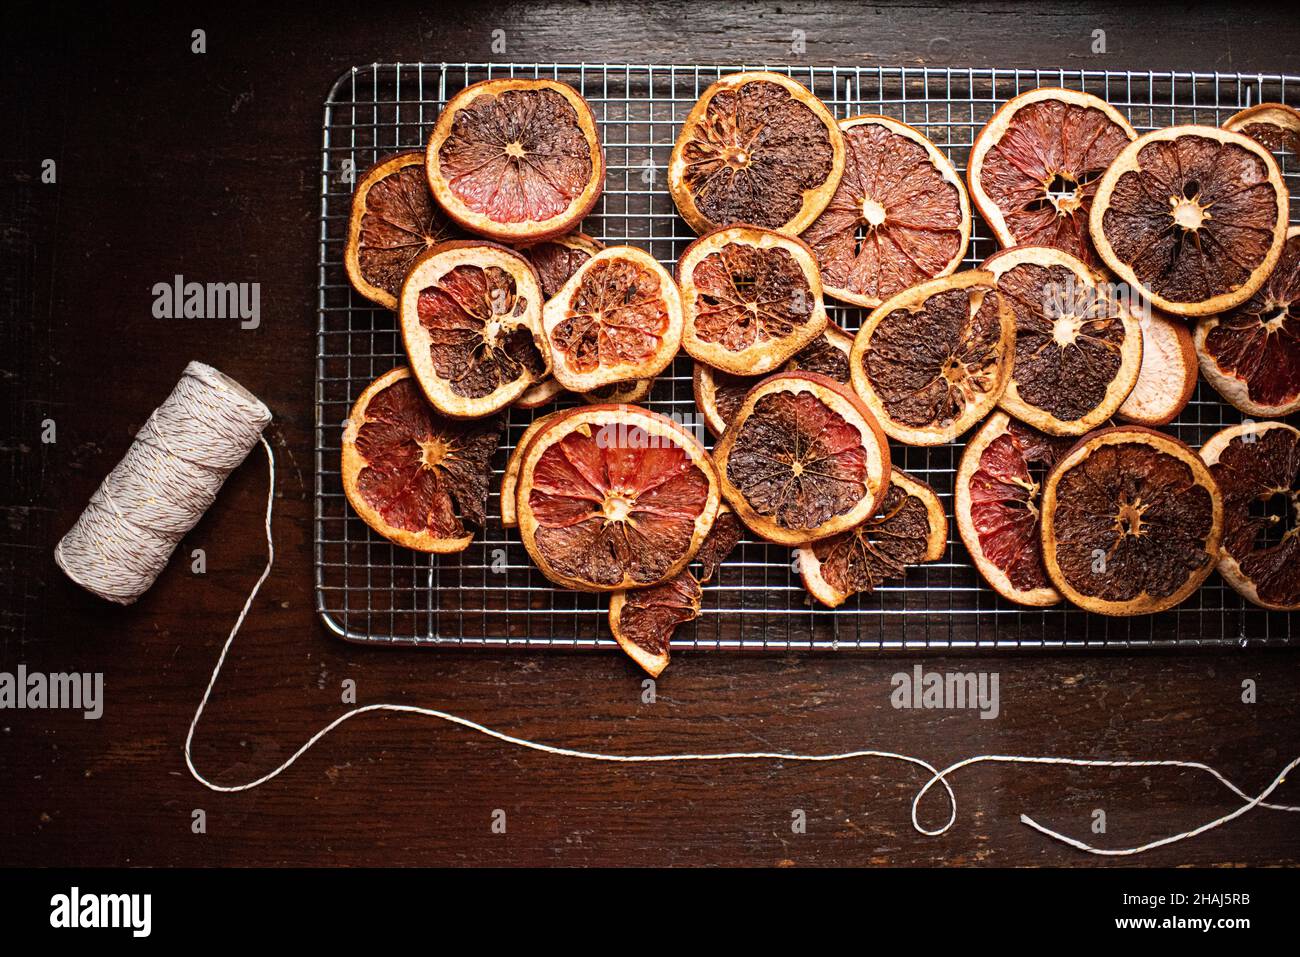 Rows of dried citrus including oranges and grapefruits with roll of natural white string, preparing to make DIY natural holiday garlands Stock Photo